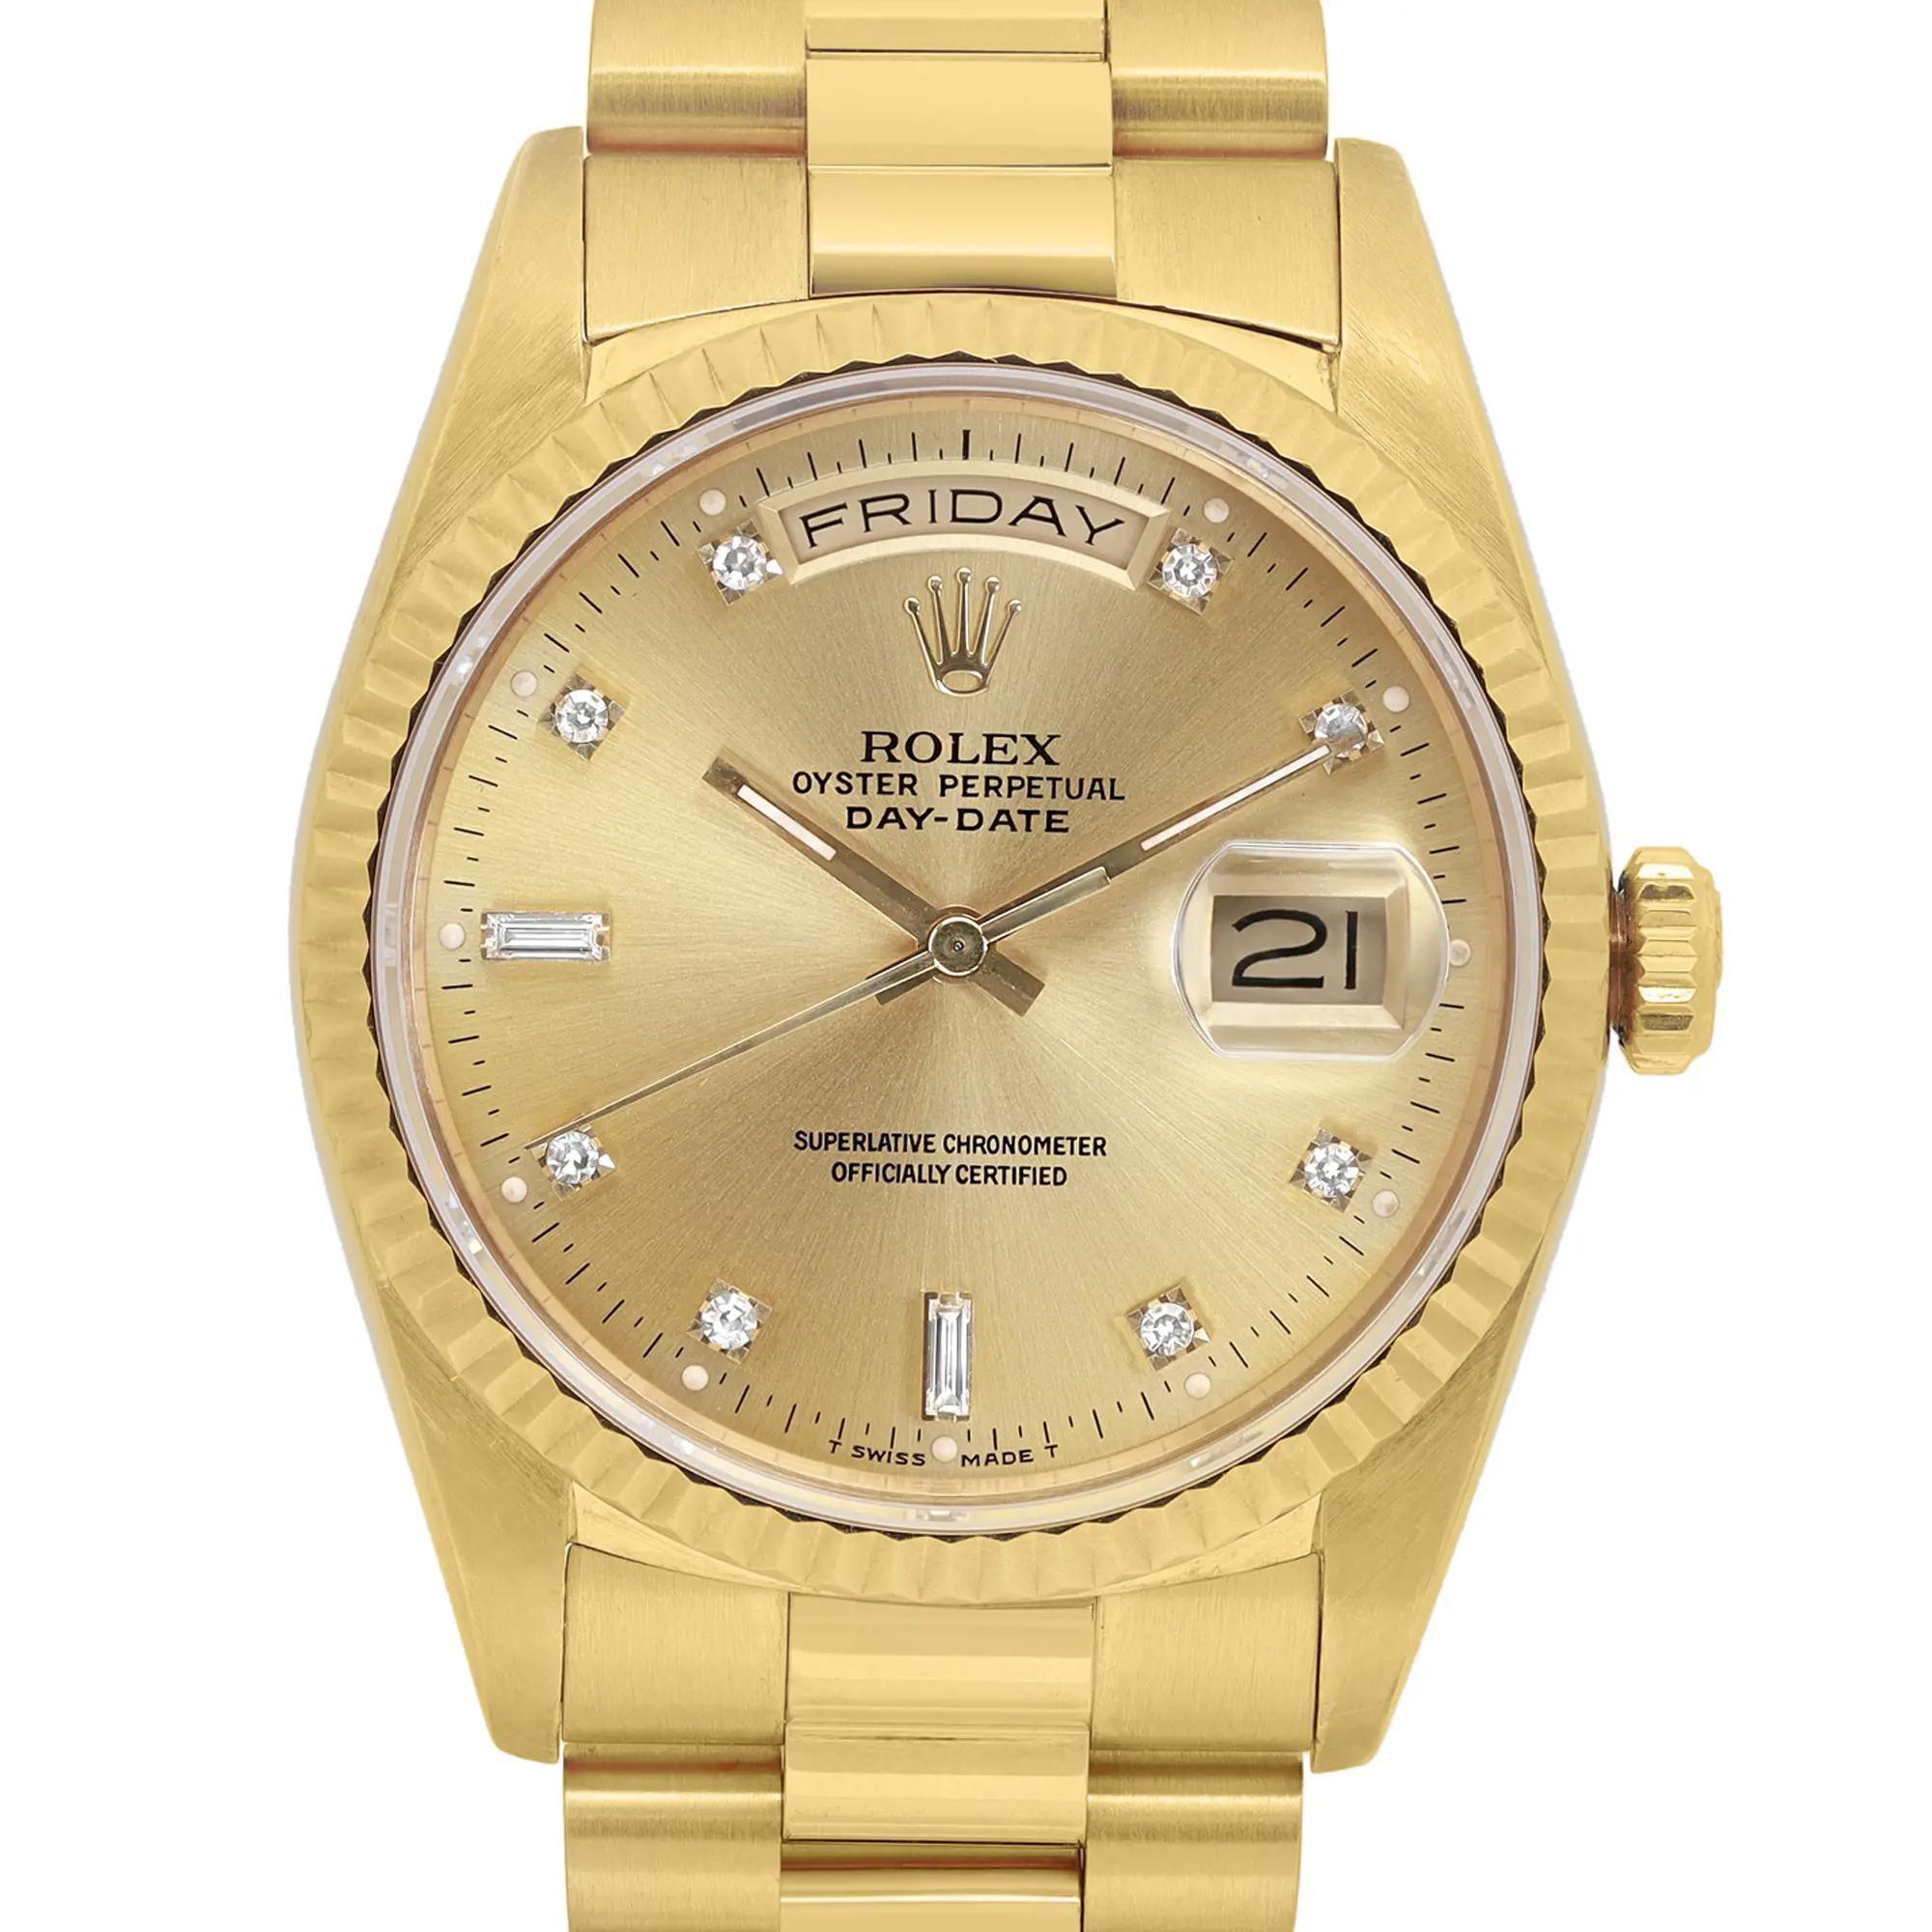 The watch was produced in 1988. Moderate slack on the bracelet. Micro dents and scratches on the case and bracelet. The original box is included. 

 Brand: Rolex  Type: Wristwatch  Department: Men  Model Number: 18238  Country/Region of Manufacture: